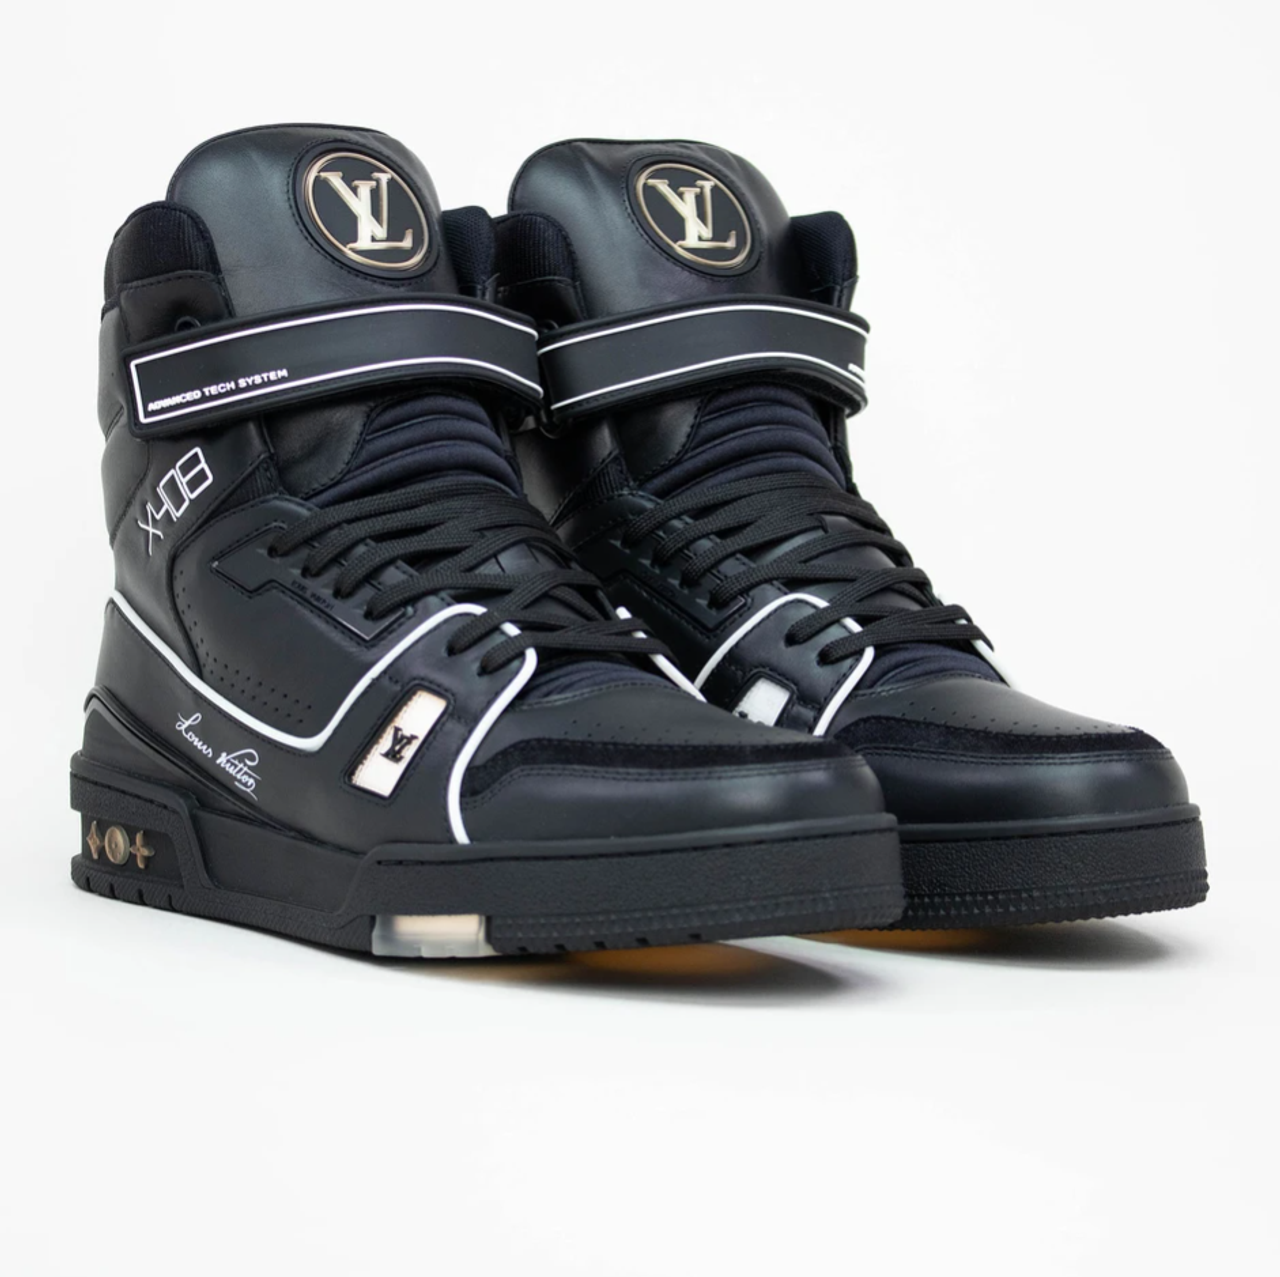 Louis Vuitton X408 Sneaker “The future is here” @virgilabloh Very